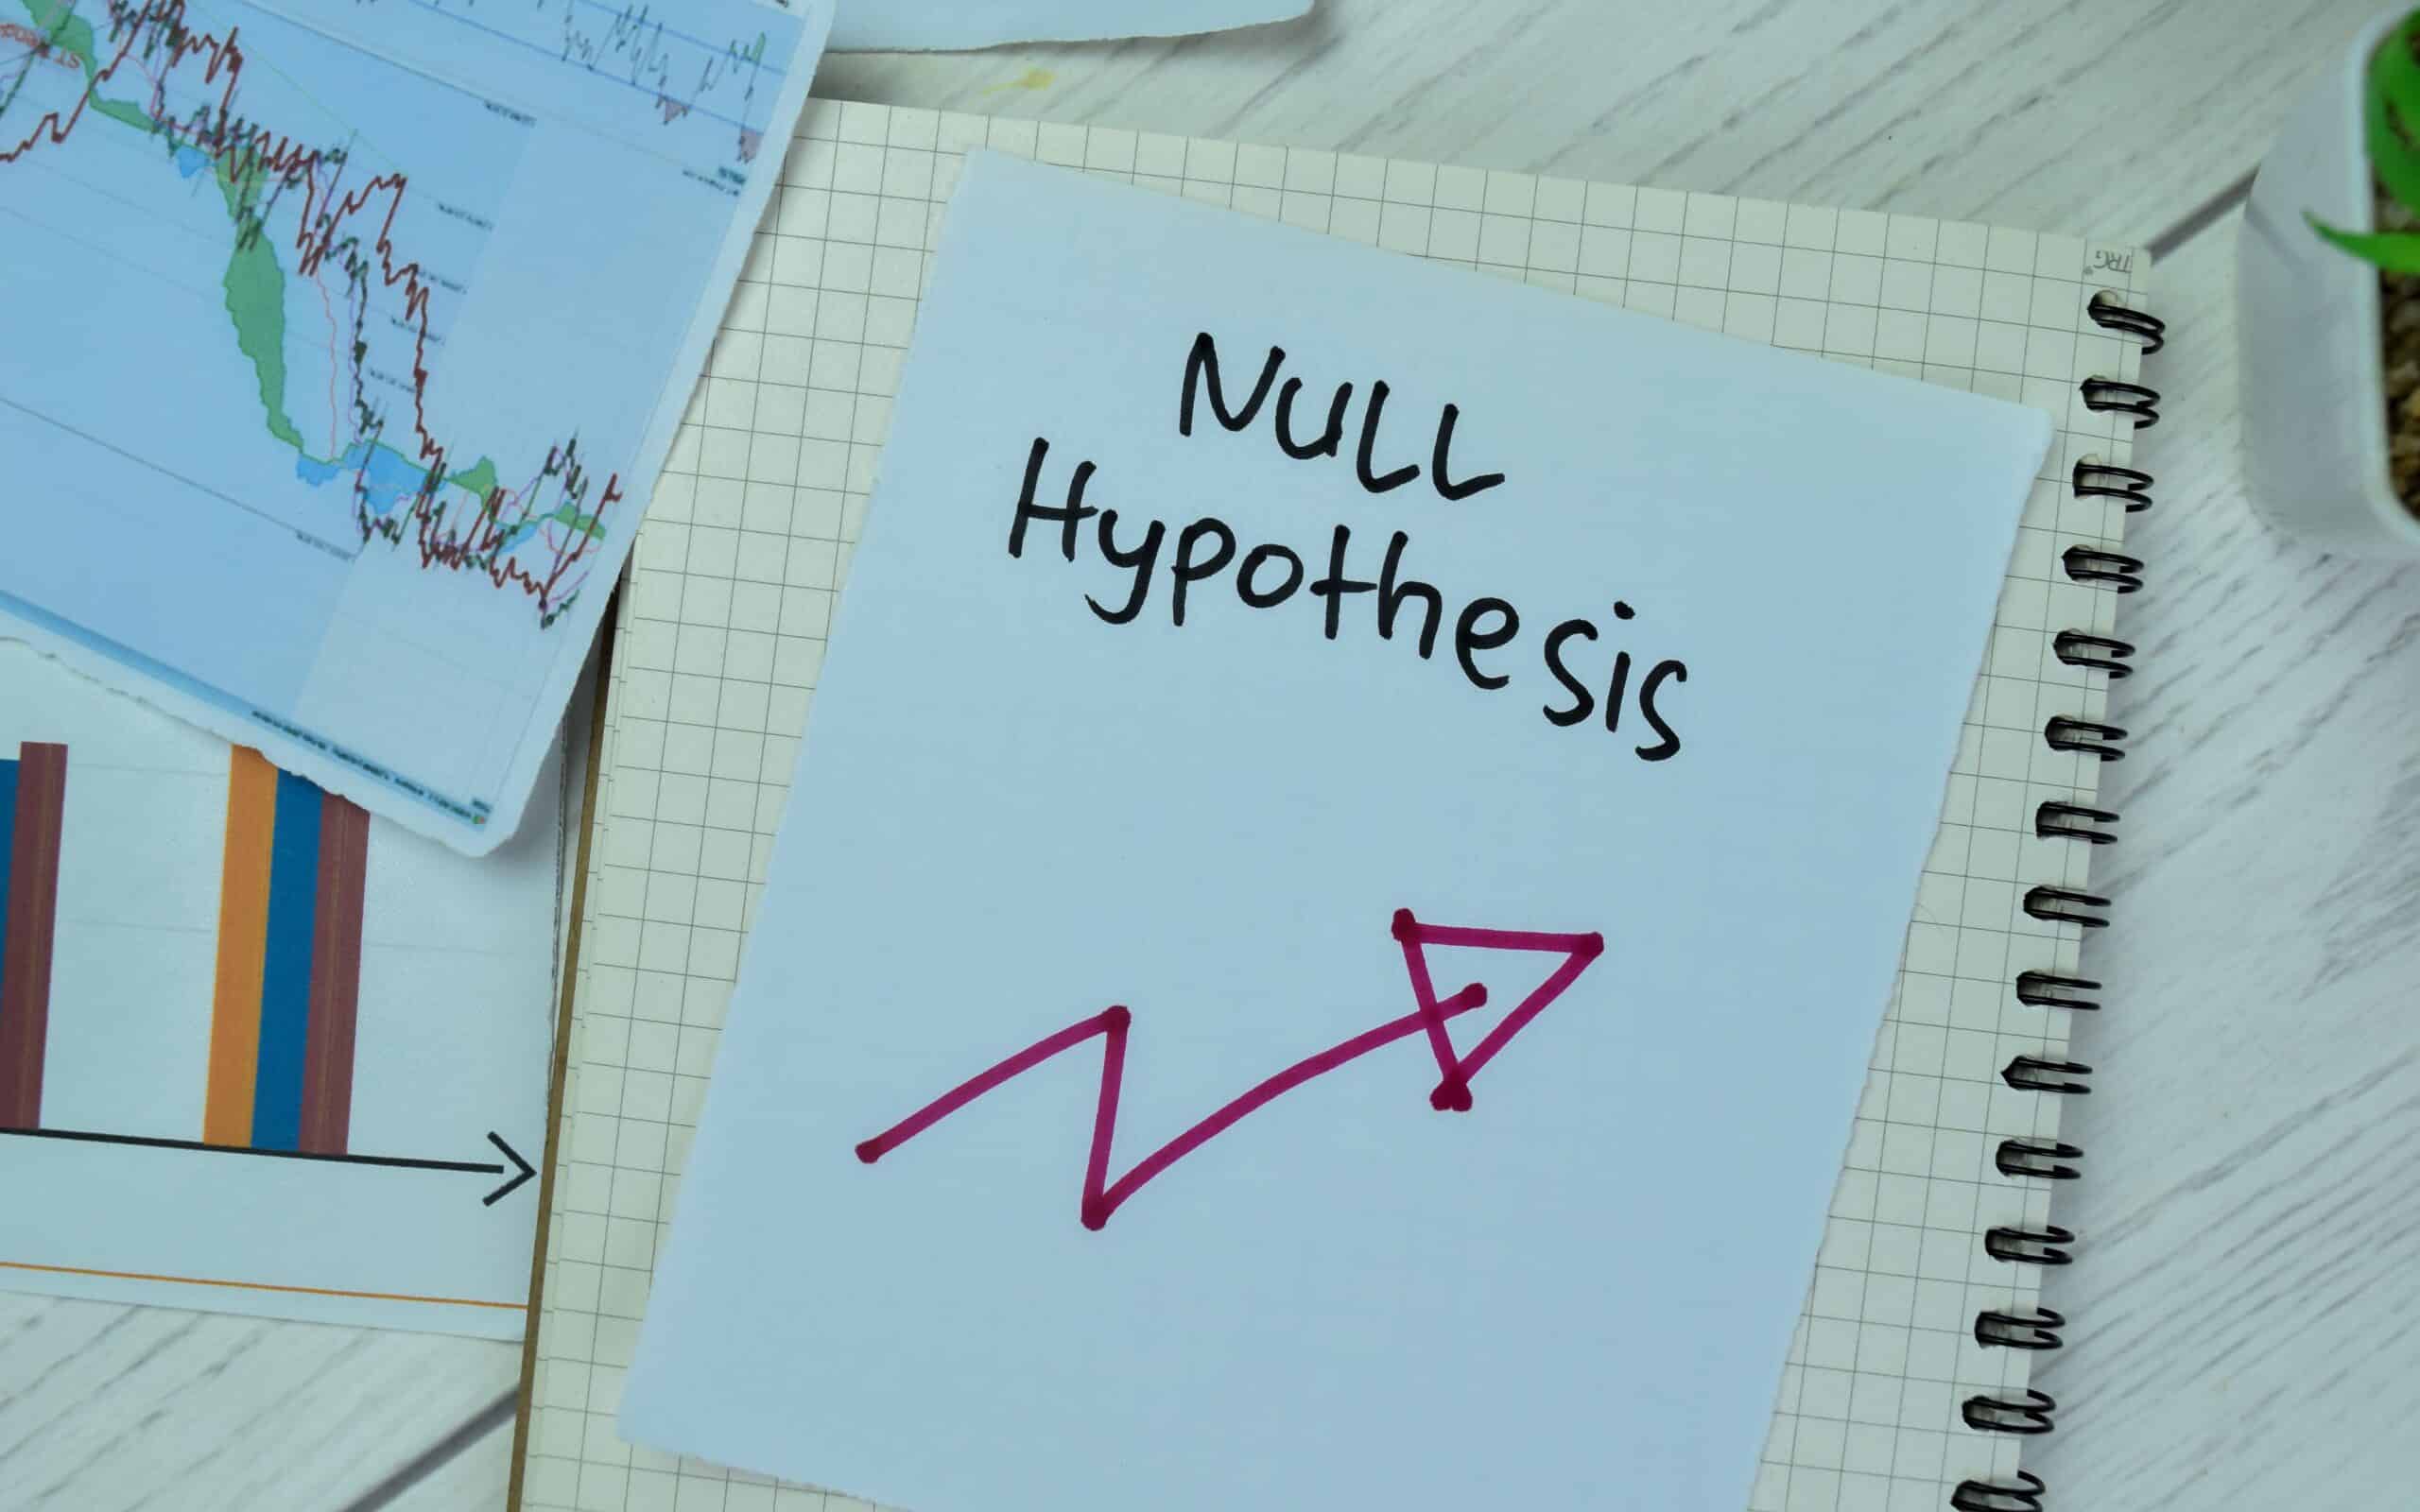 null hypothesis definition business